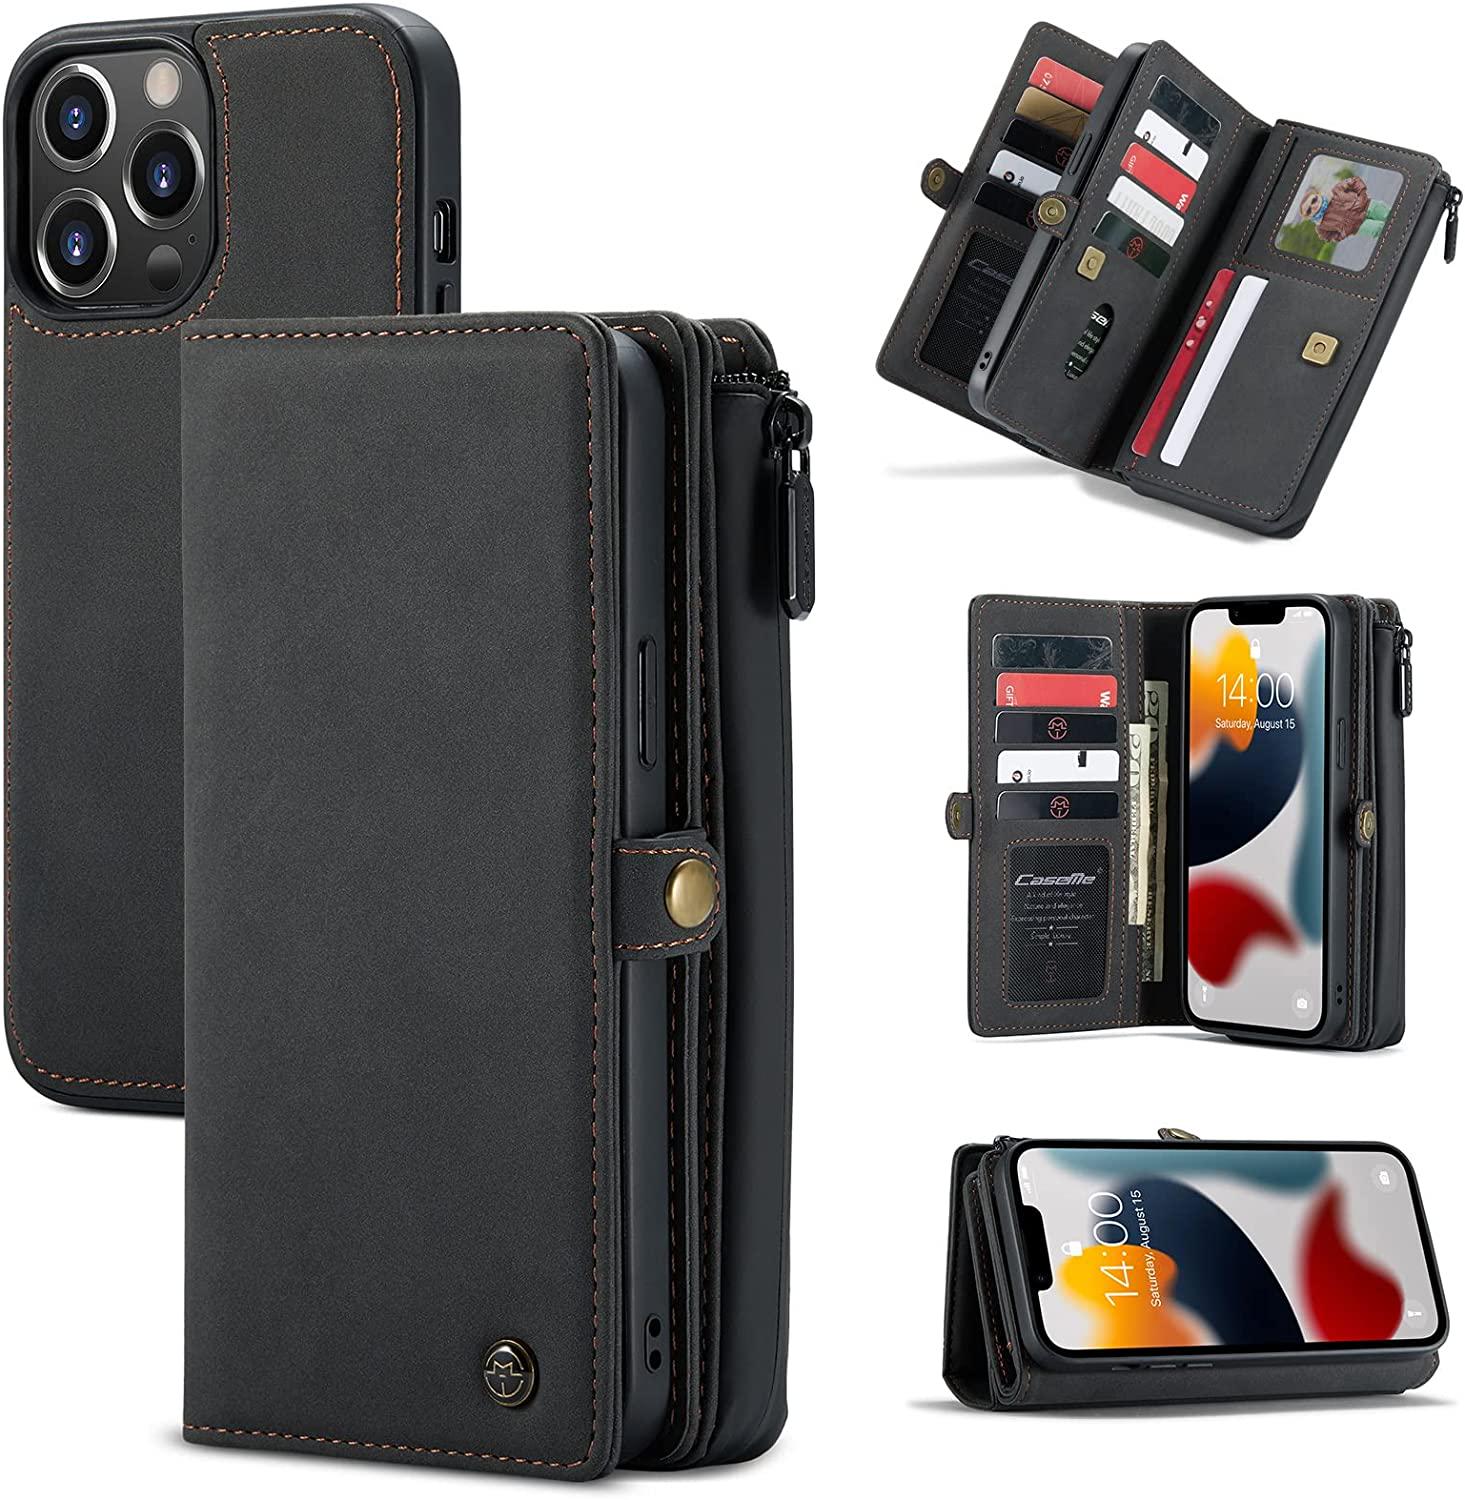 Kowauri, Kowauri Wallet Case for iPhone 13 Pro Max,Zipper Purse Folio Magnetic Leather Wallet Protection Card Slot Holder Detachable Slim Magnetic Back Cover Case for iPhone 13 Pro Max 6.7 inch 2021 (Black)